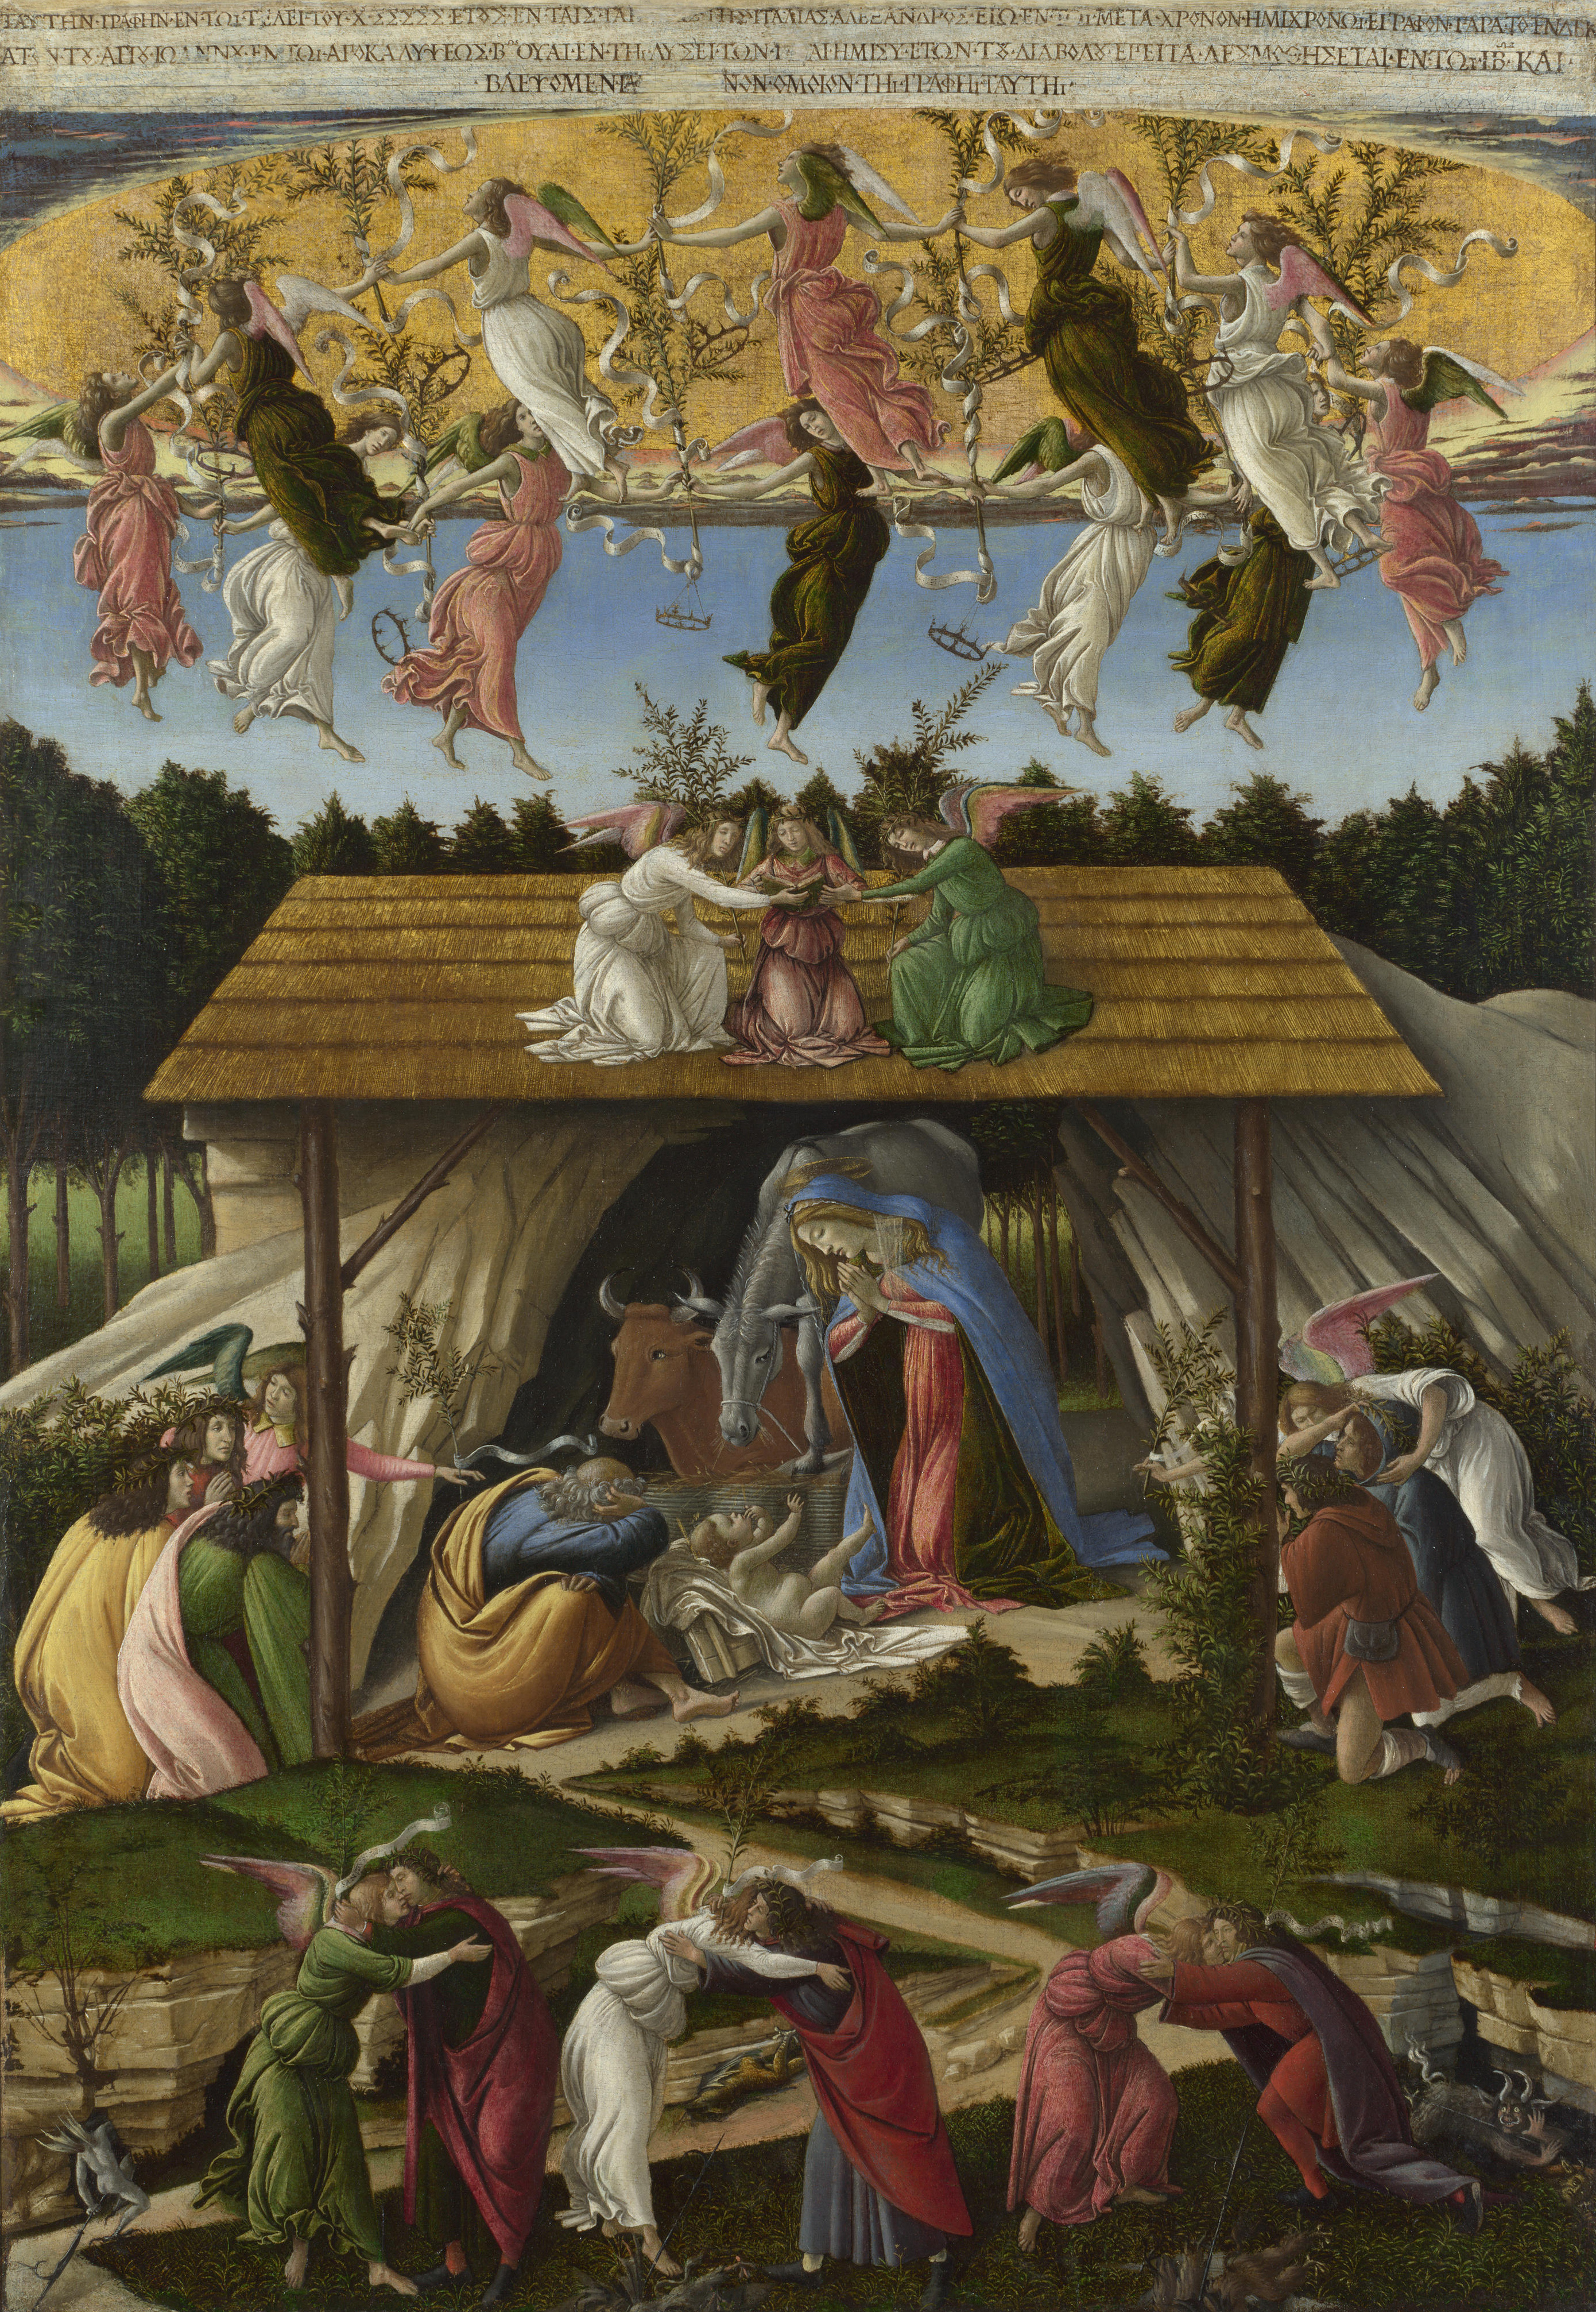 The Mystical Nativity by Sandro Botticelli - 1501 - 108.6 x 74.9 cm National Gallery